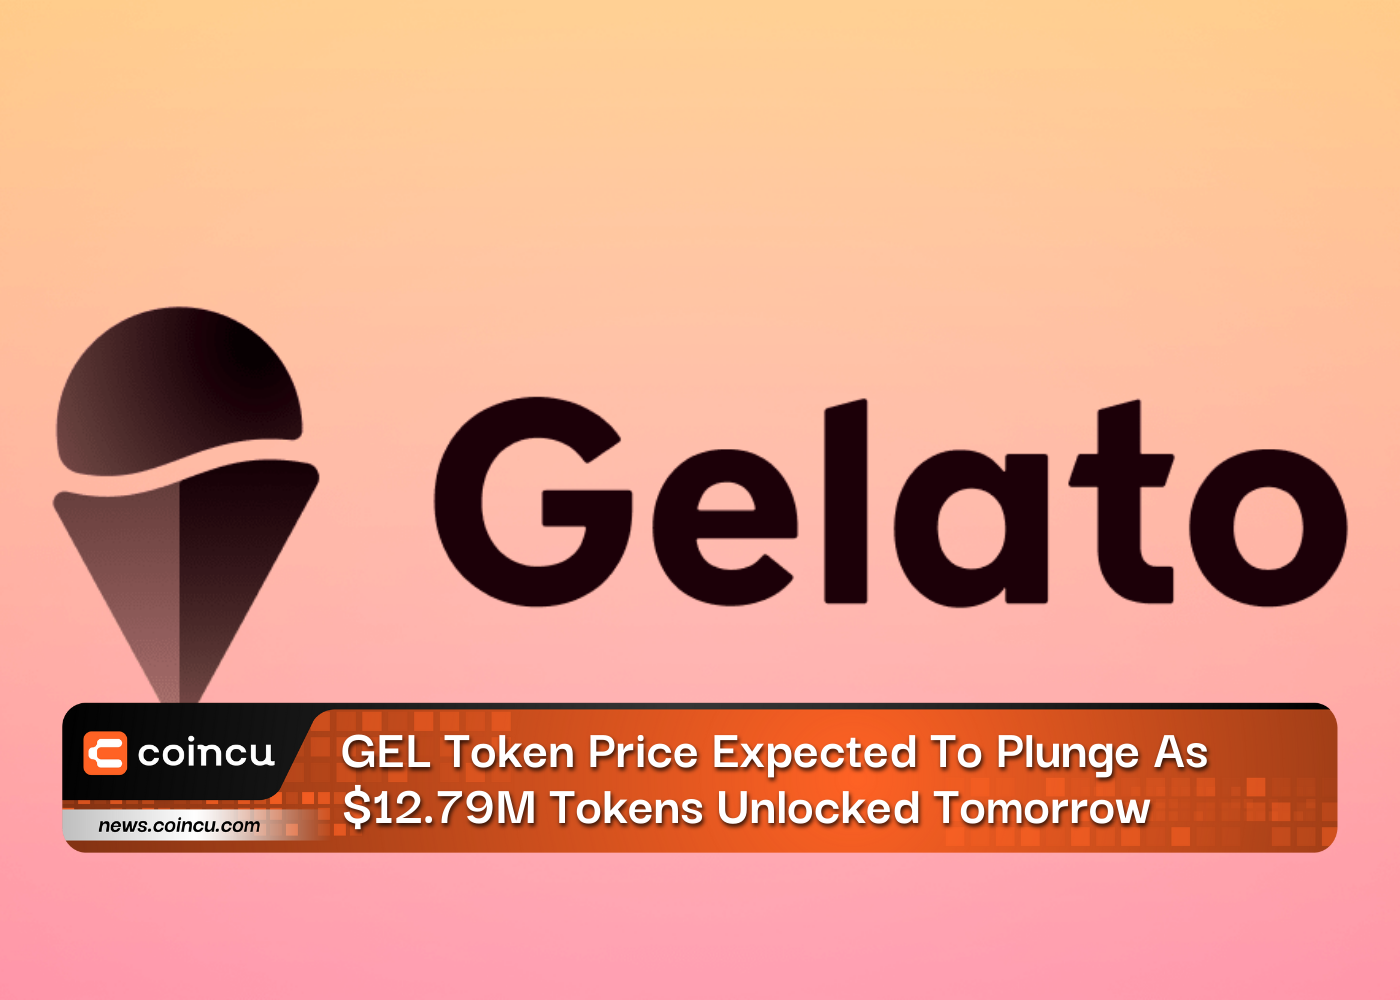 GEL Token Price Expected To Plunge As $12.79M Tokens Unlocked Tomorrow